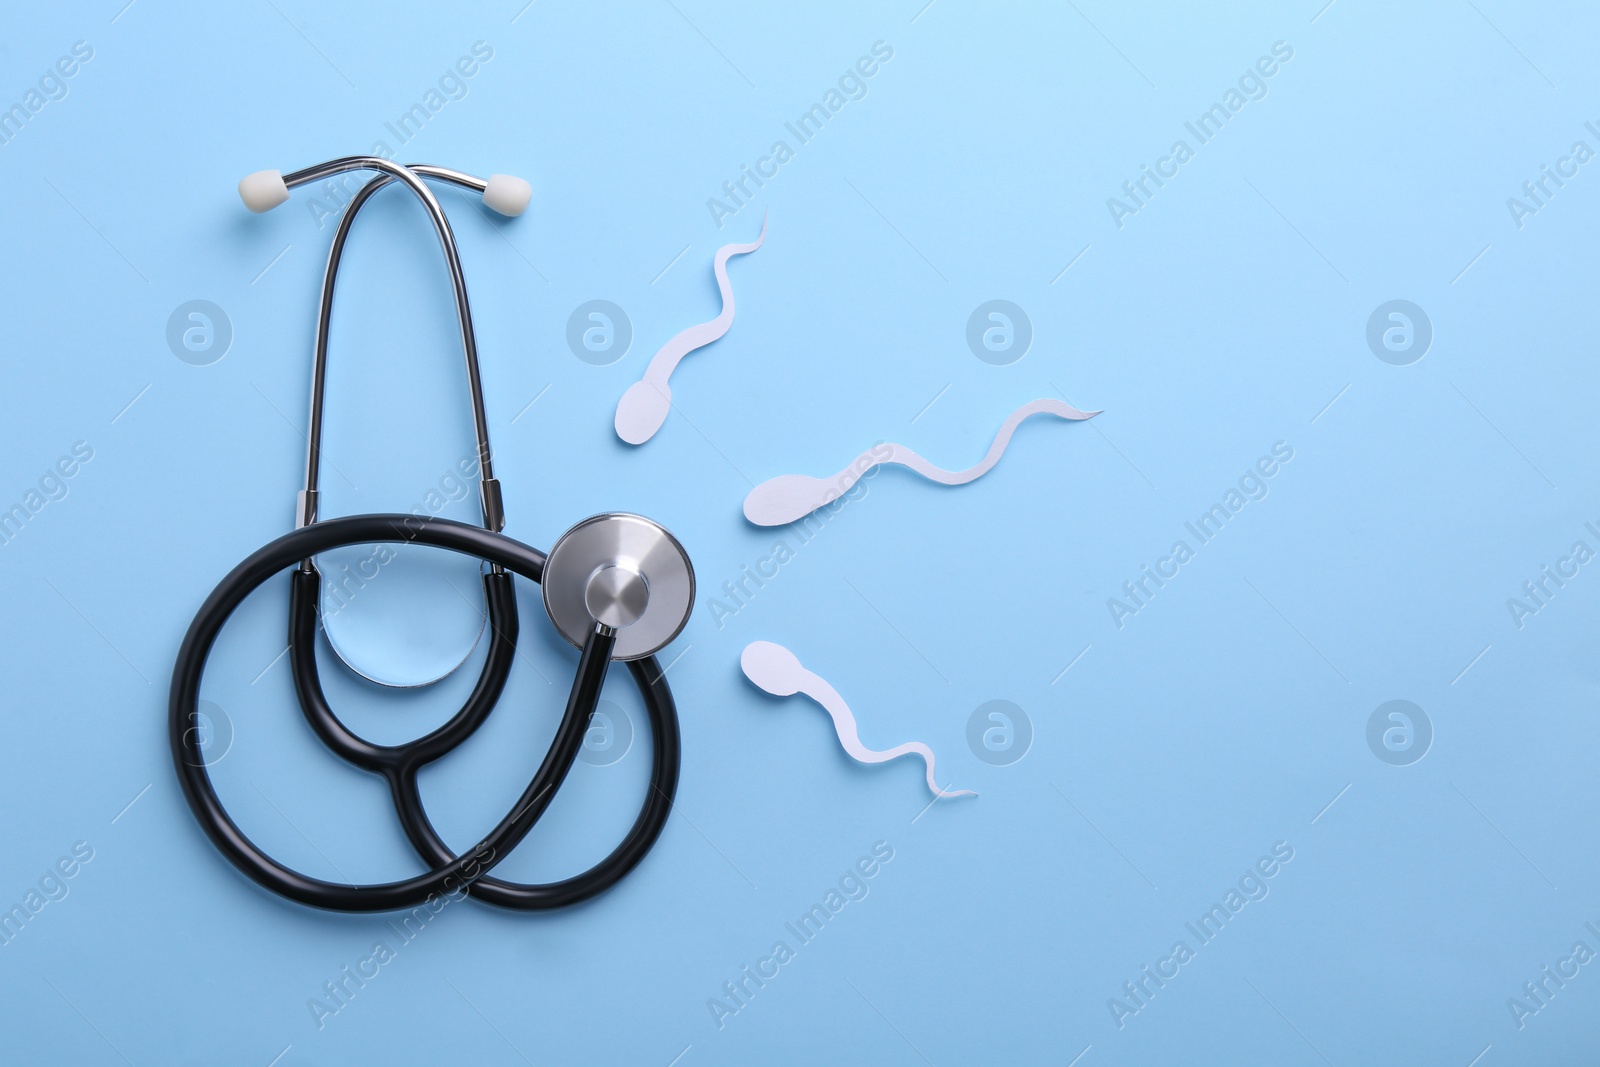 Photo of Reproductive medicine. Figures of sperm cells and stethoscope on light blue background, flat lay with space for text